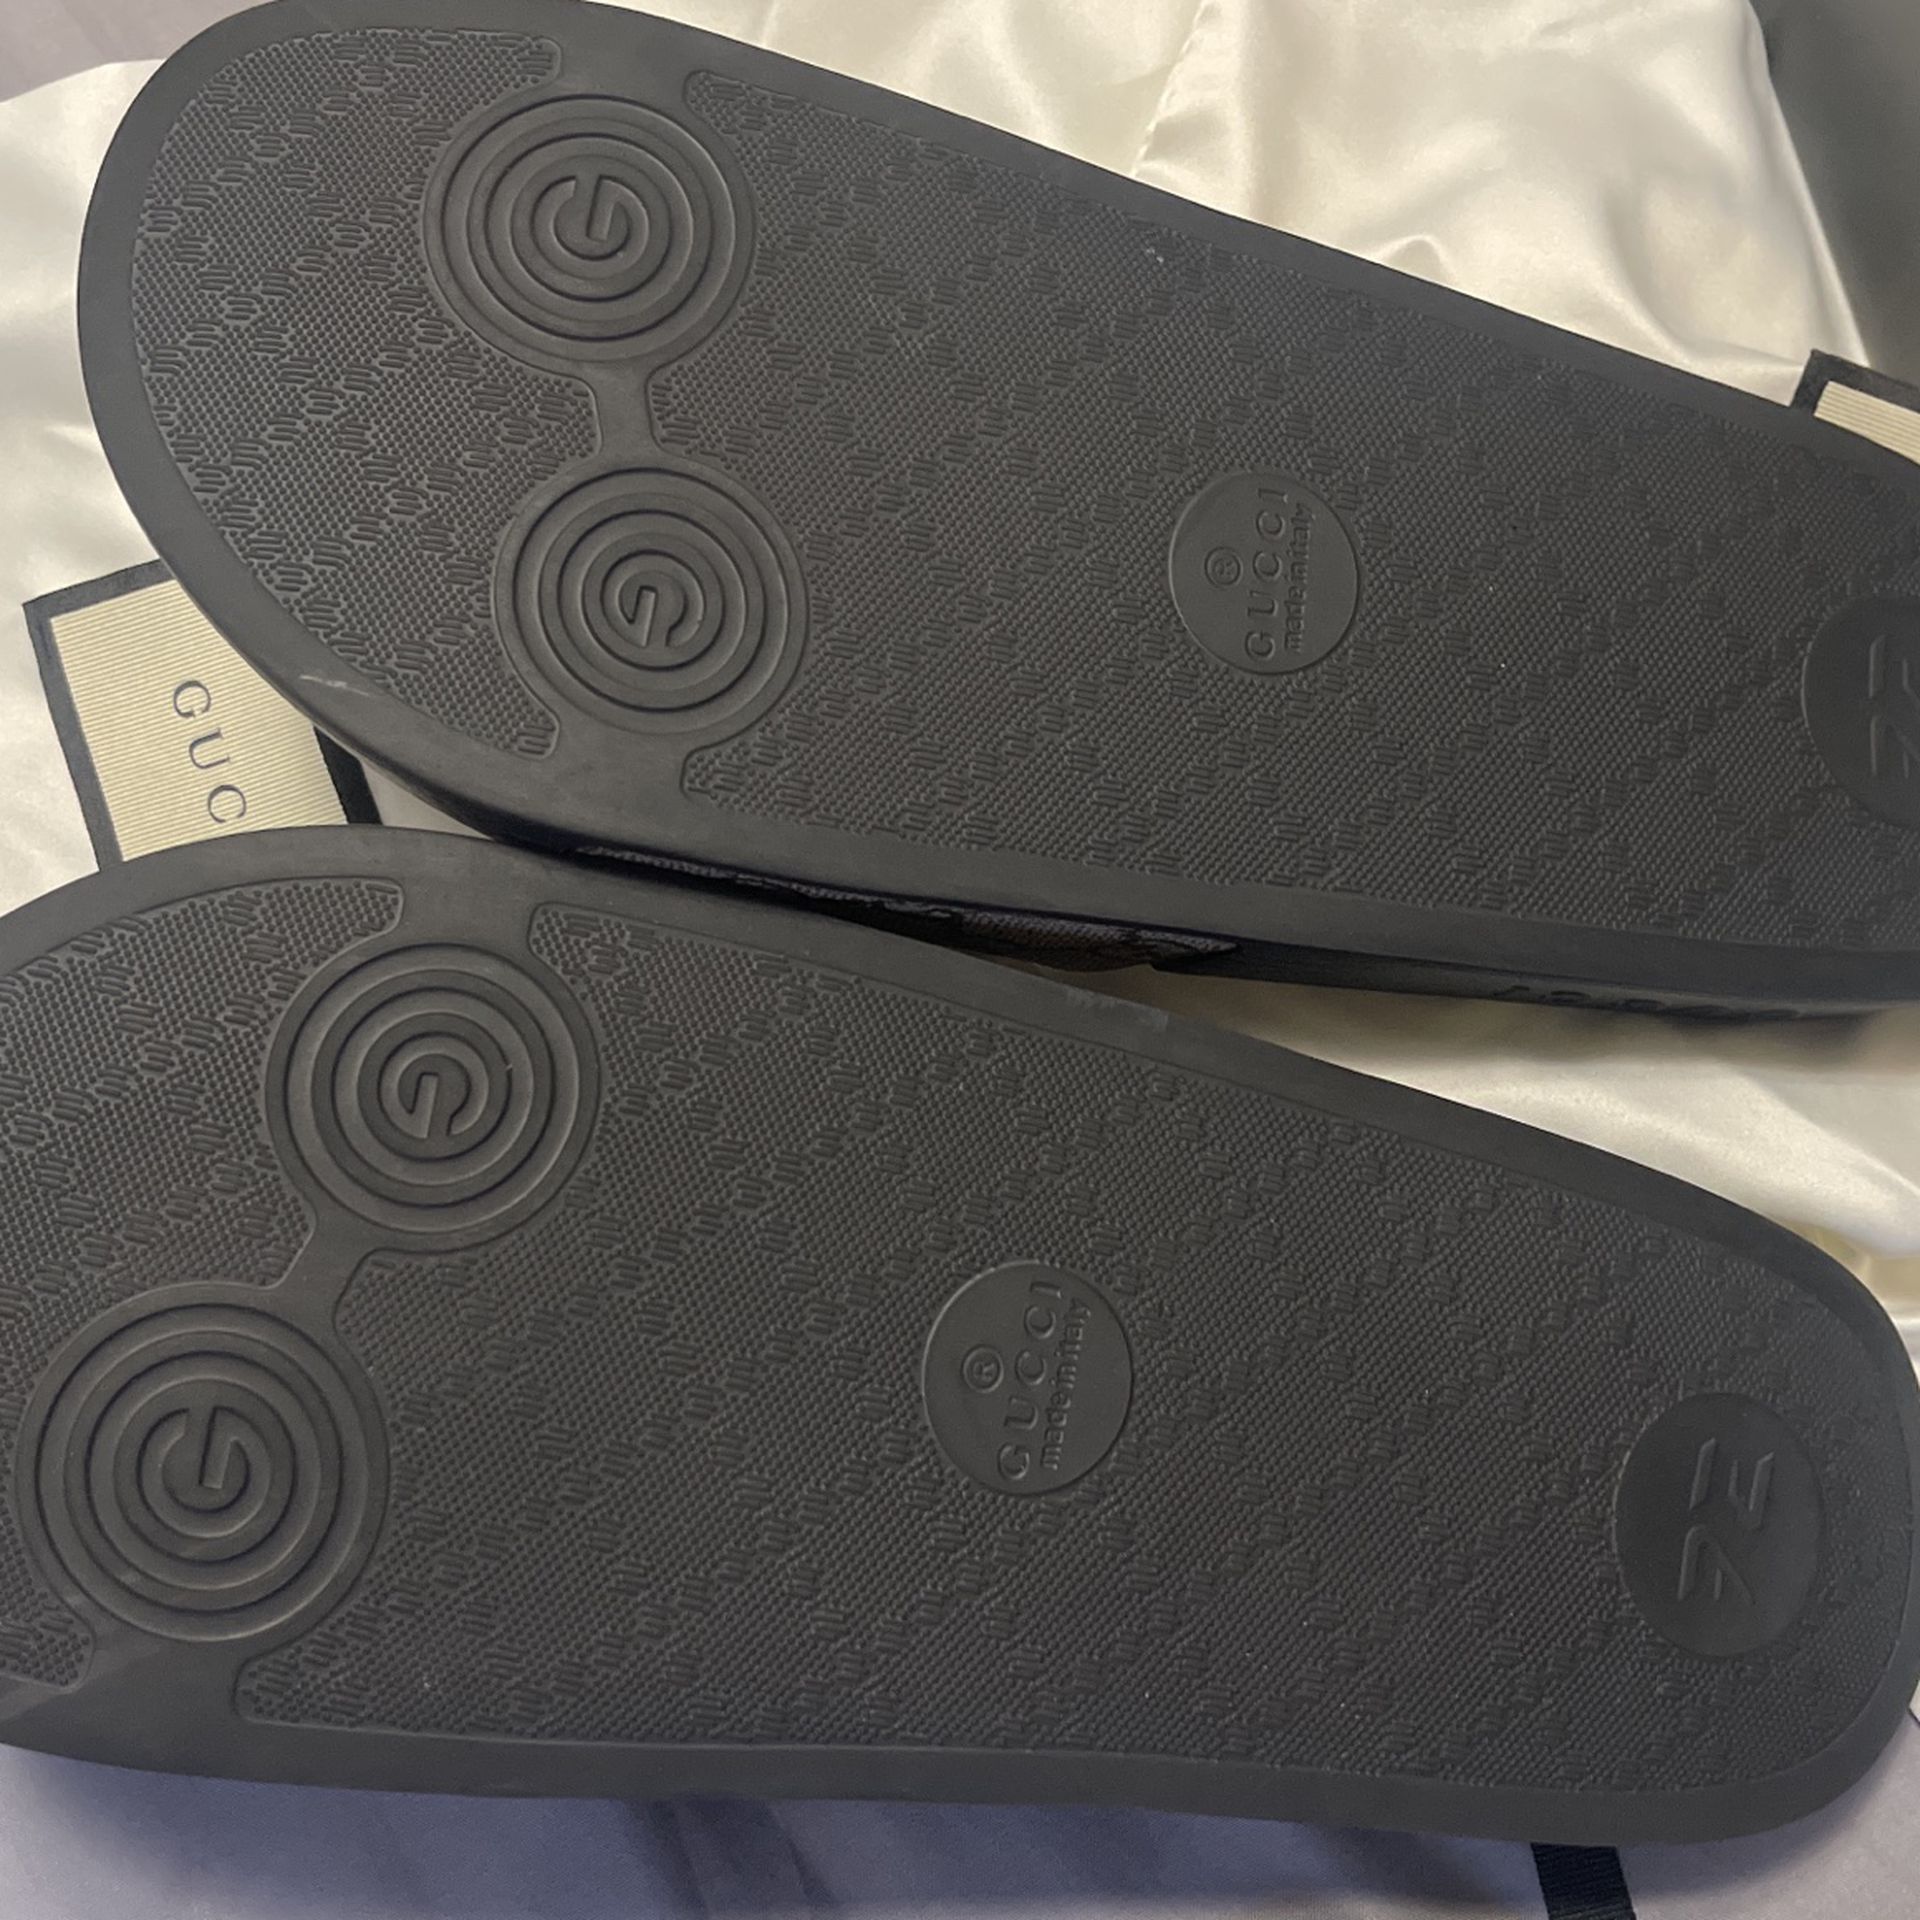 Supreme Louis Vuitton Slides for Sale in Woodway, WA - OfferUp